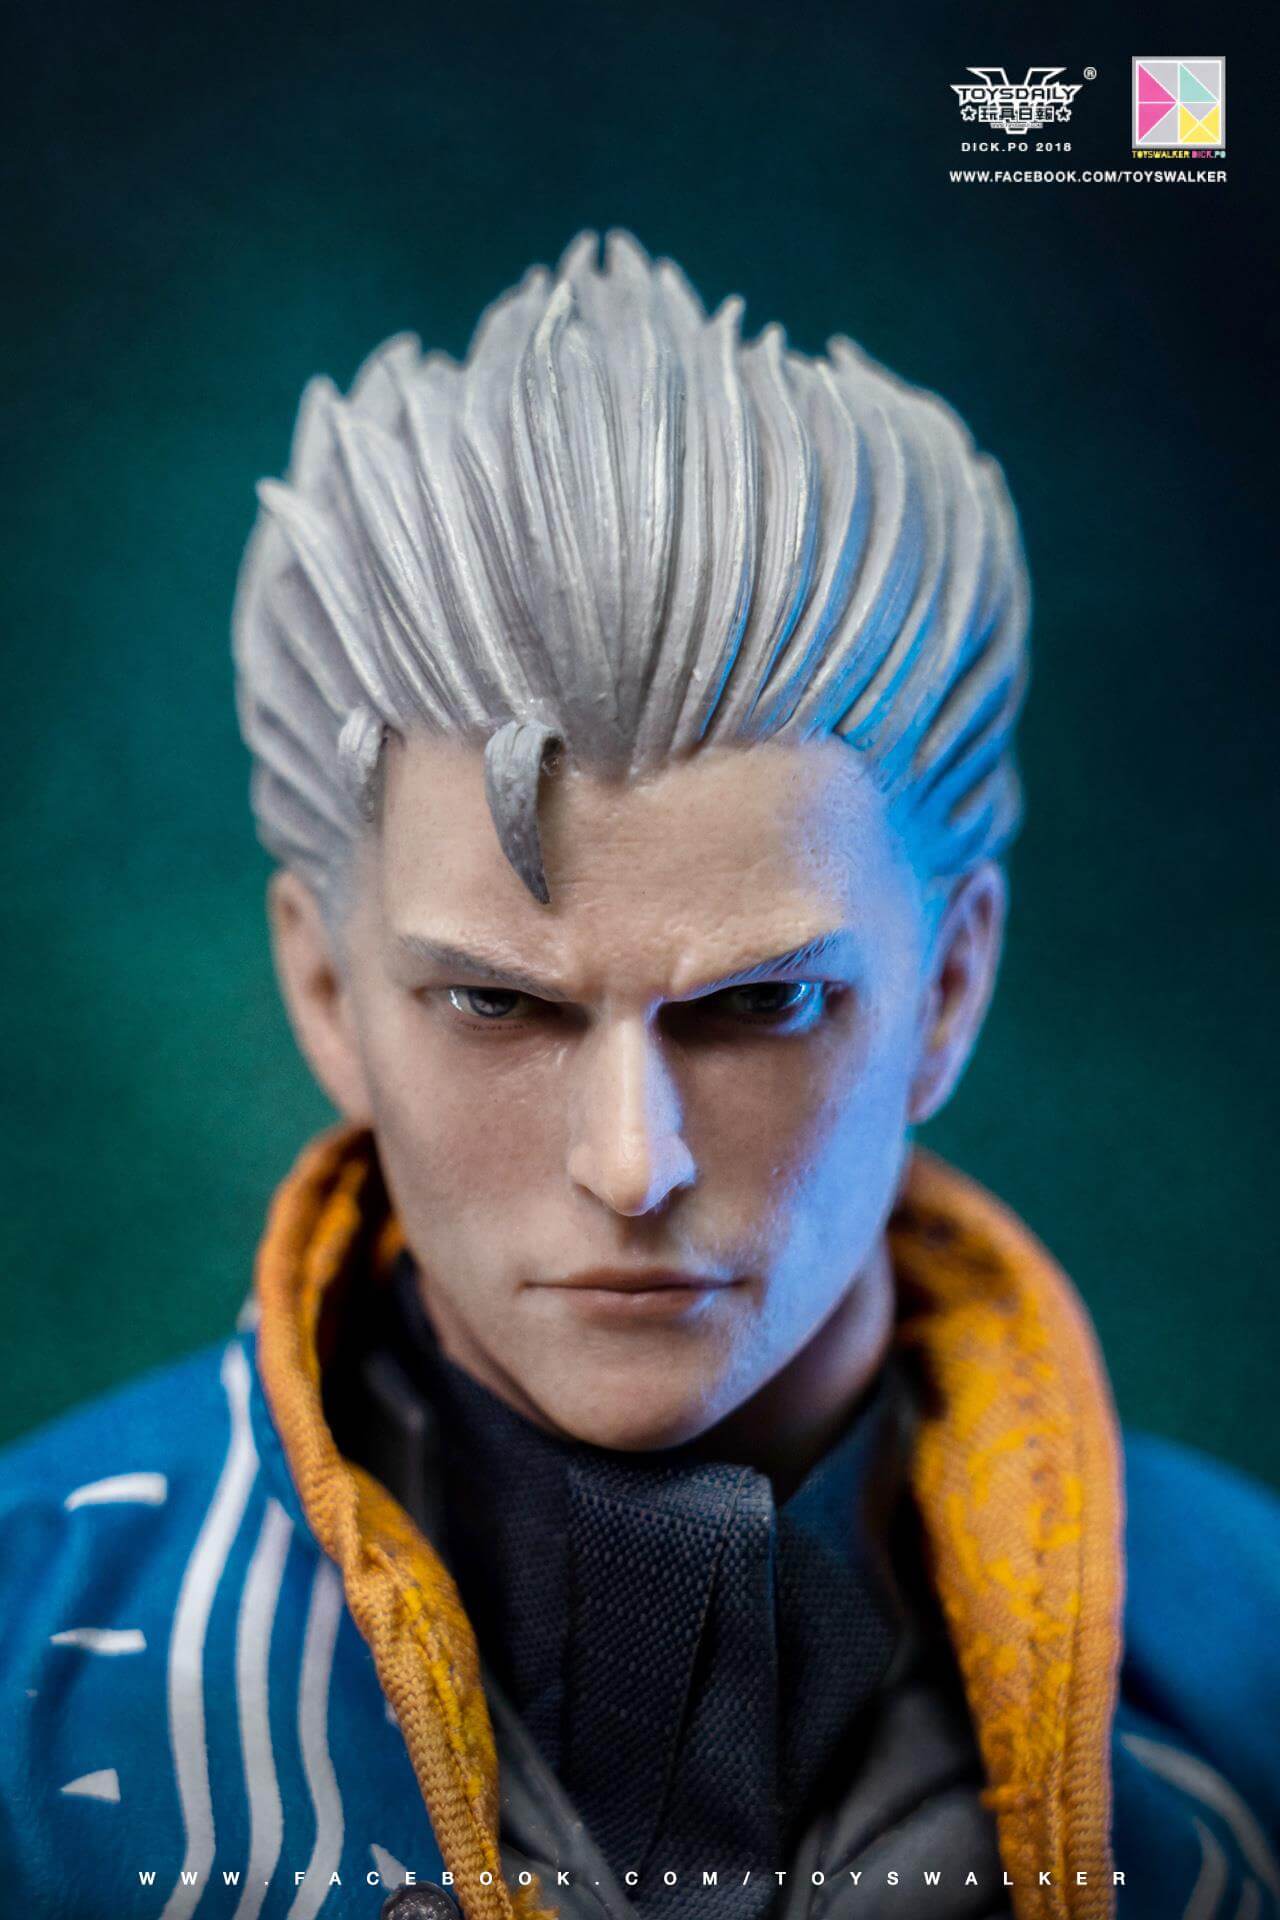 Devil May Cry 3 Vergil 1/6 Scale Action Figure - Midtown Comics